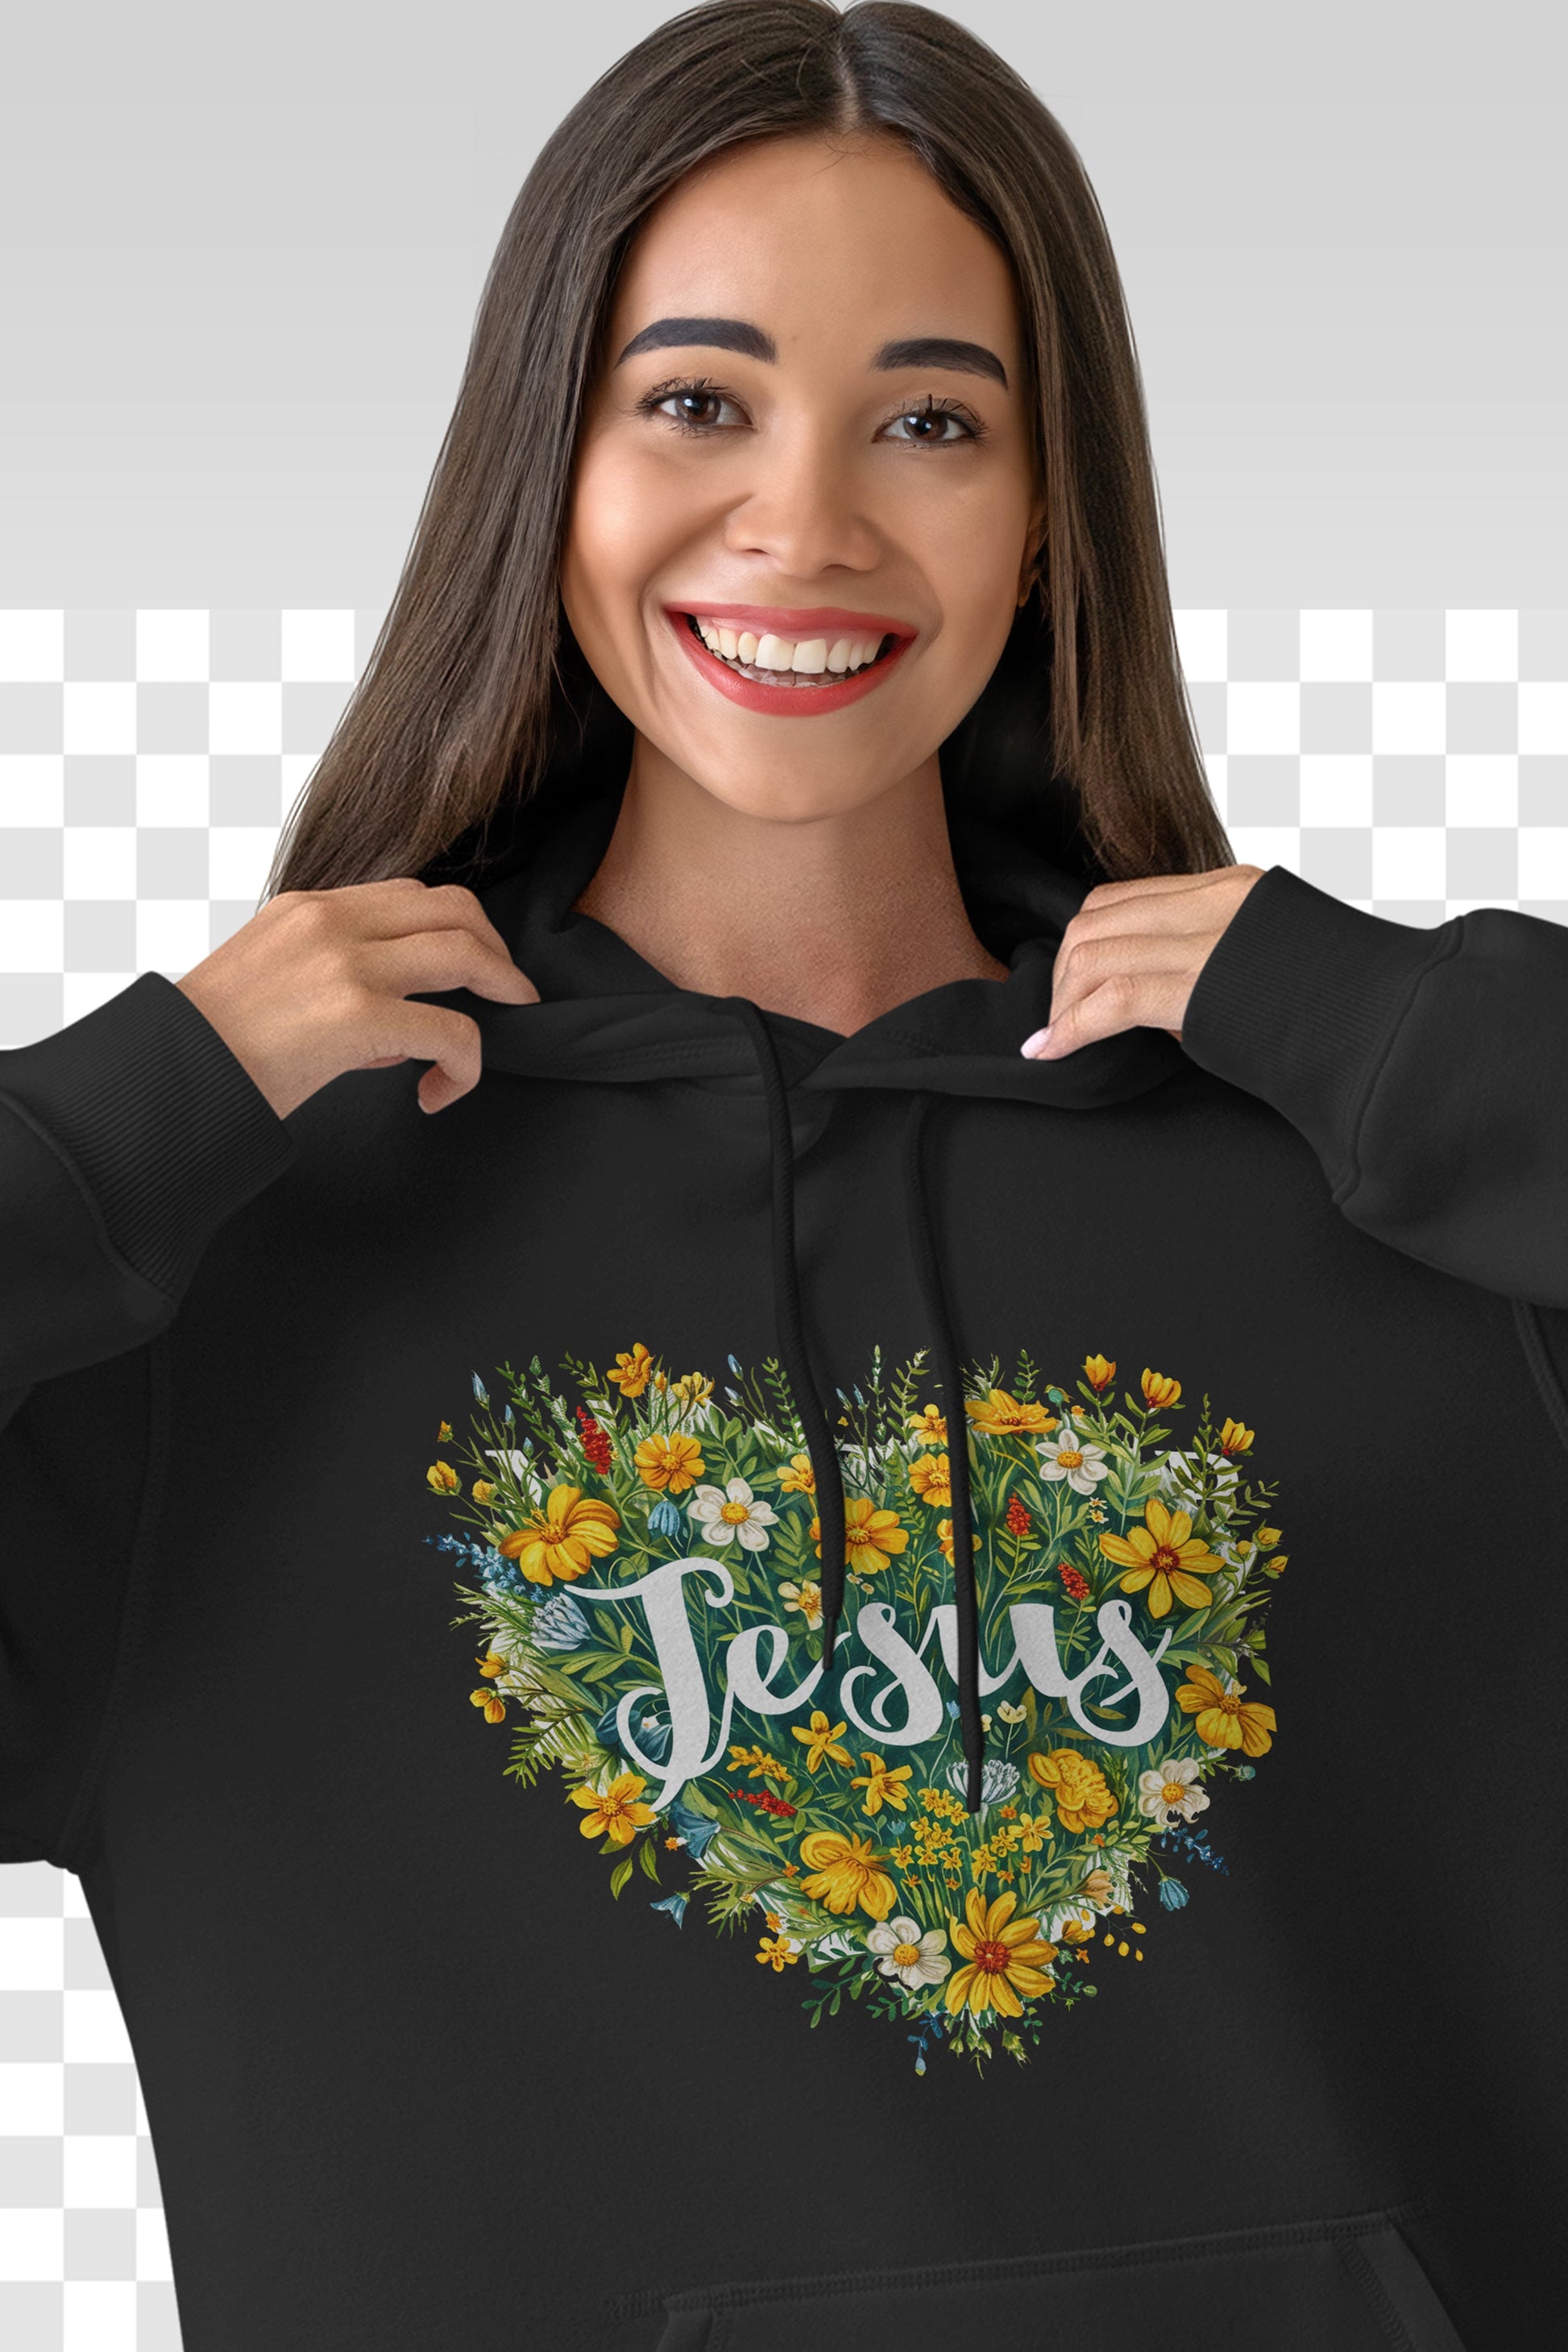 Jesus Heart Wildflower Hooded Sweatshirt | Branch and Stick Branch and Stick